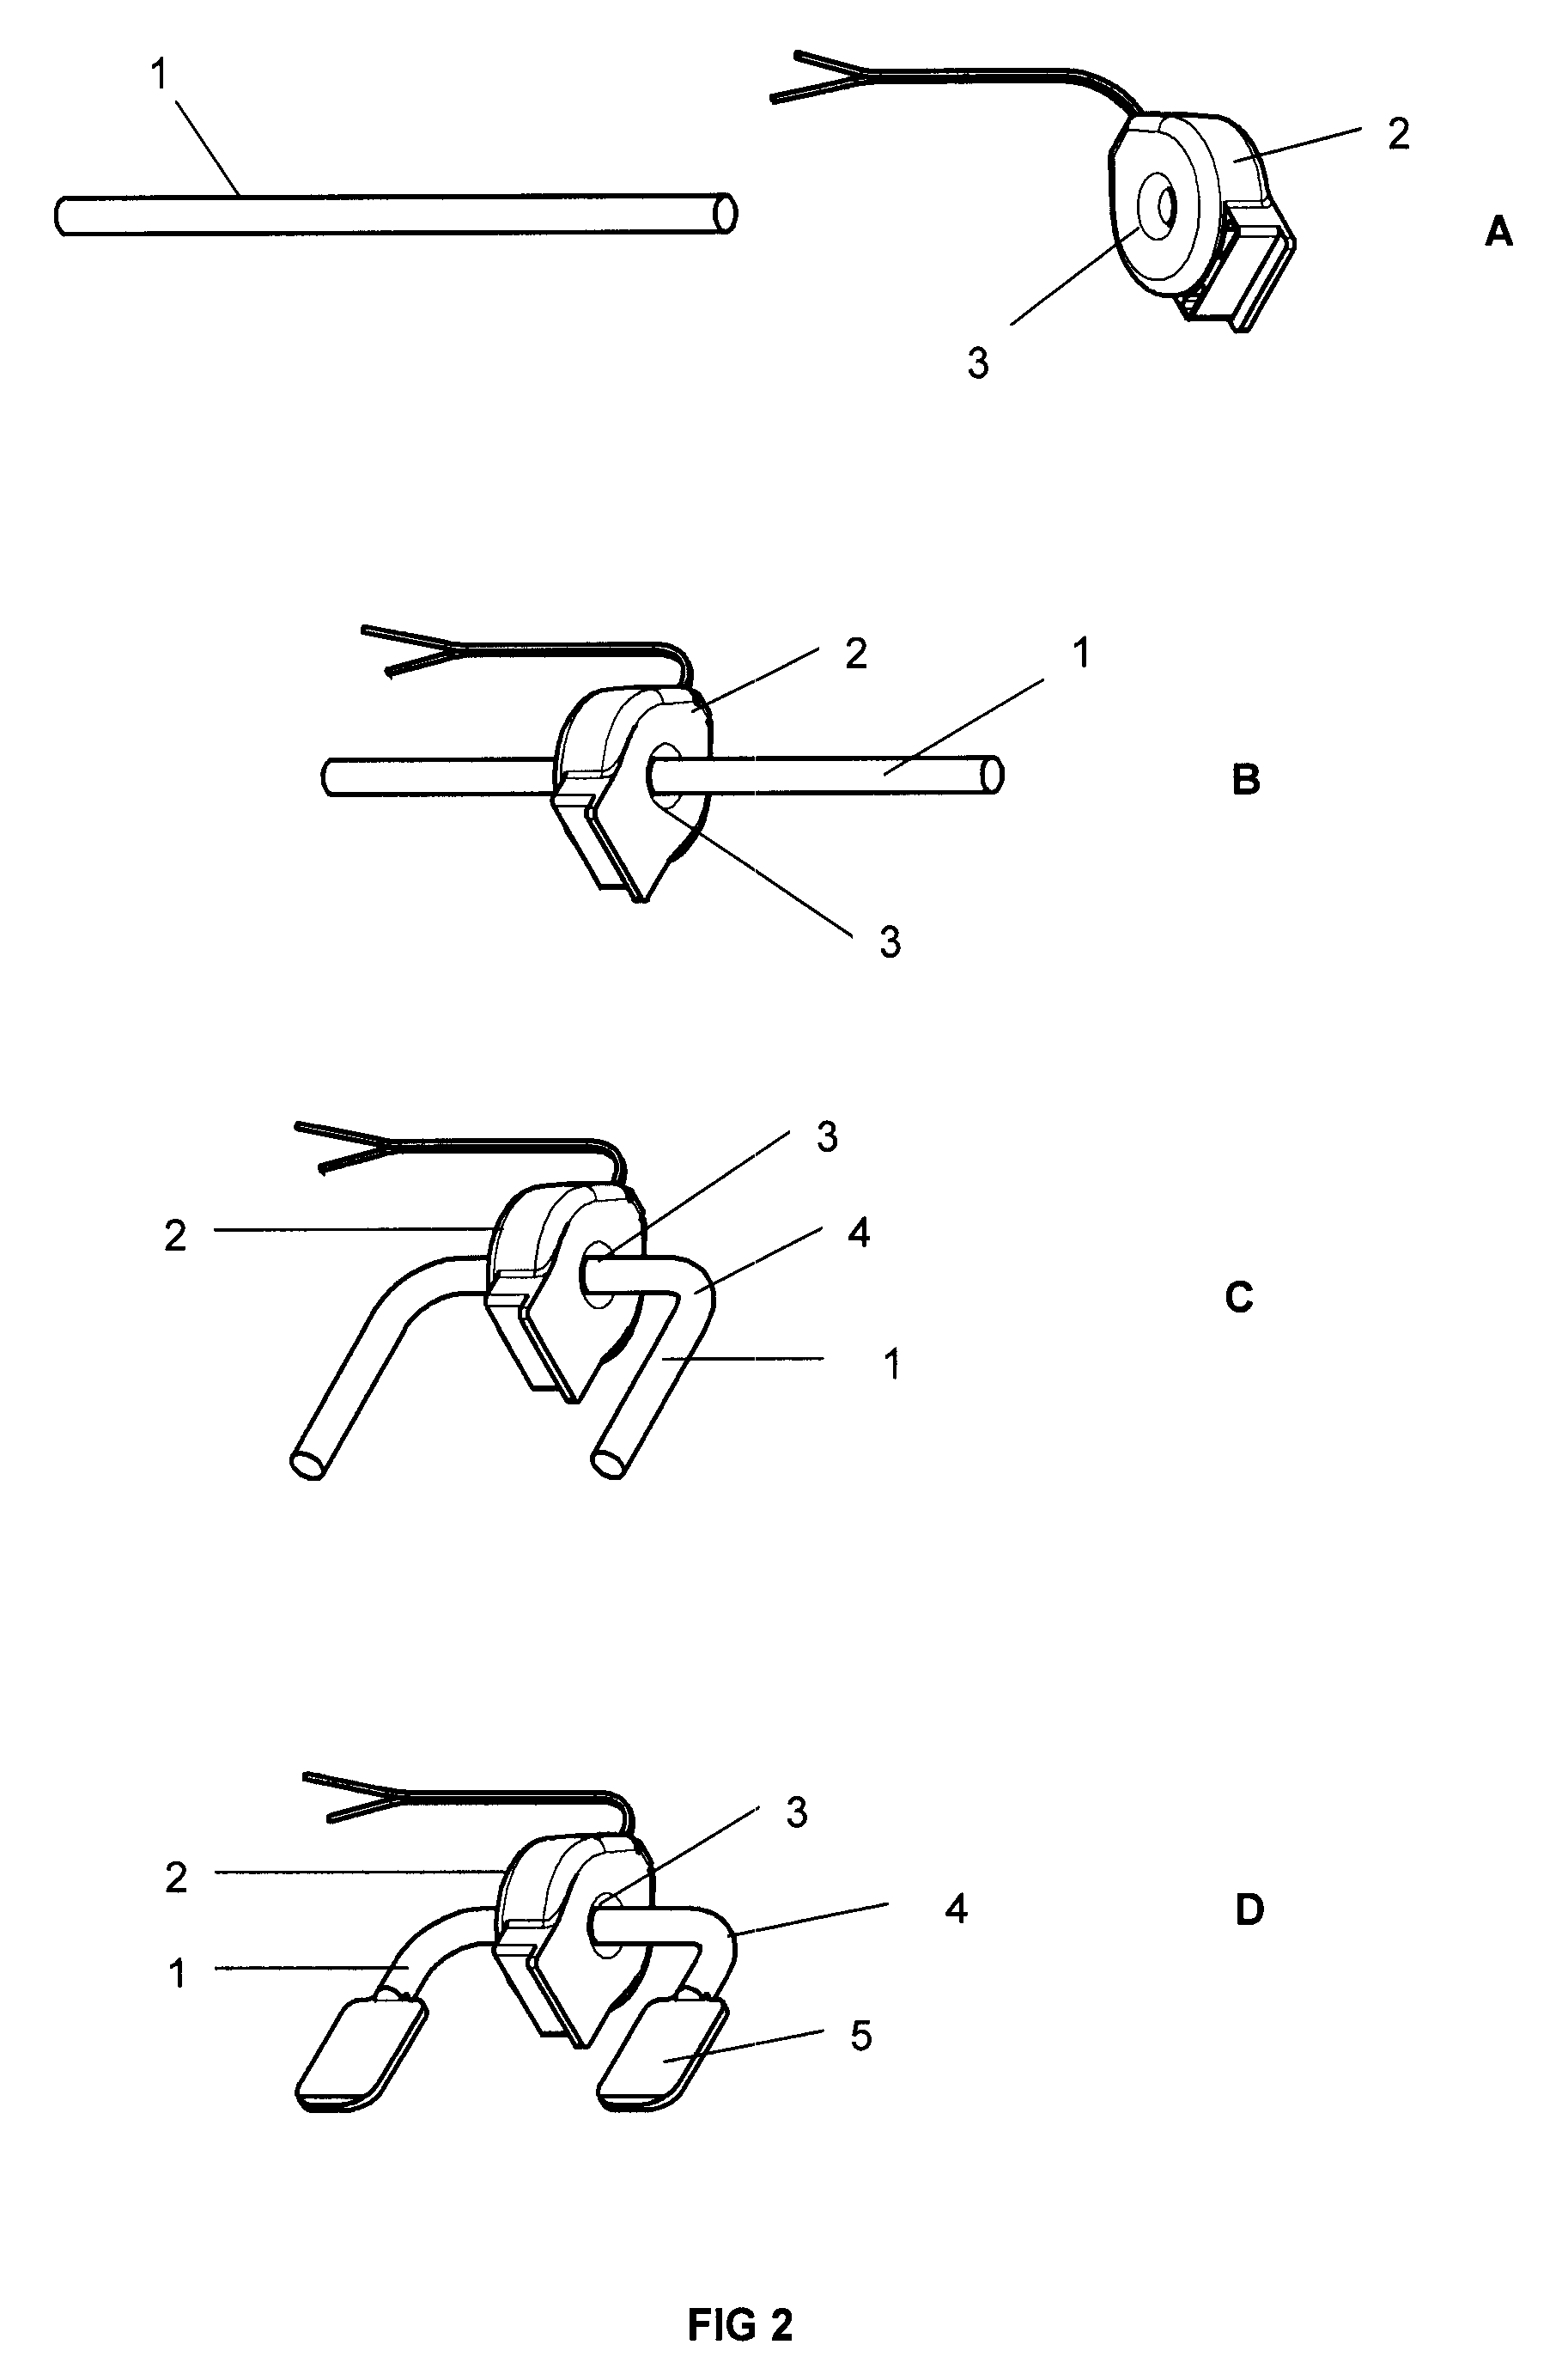 Method for Producing an Electricity Sensing Device